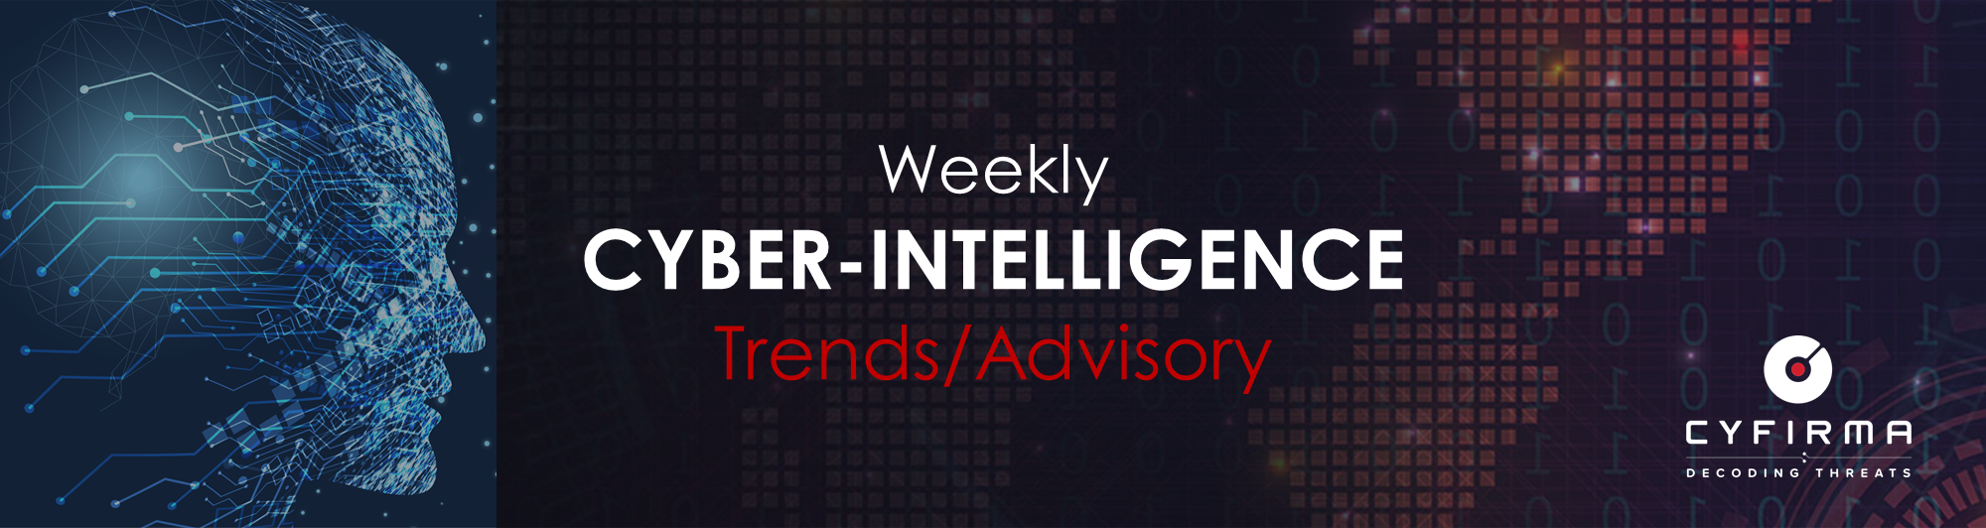 Weekly Cyber-Intelligence Report – 22 May 2021